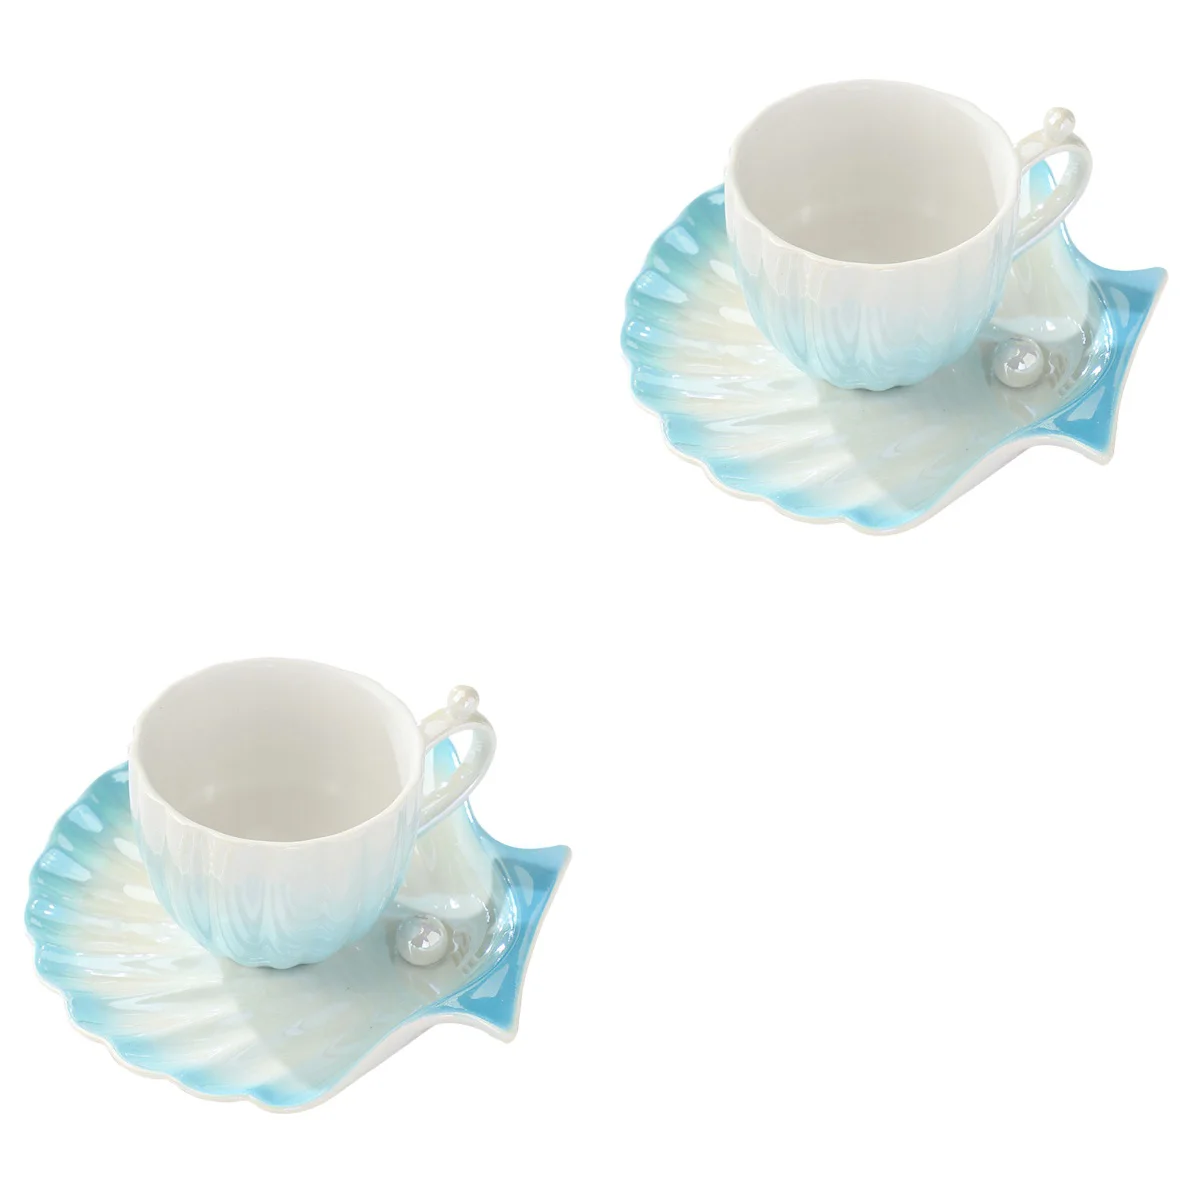 

Cup Coffee Cups Tea Saucers Set Cappuccino Marble Saucer Porcelain Pearl Teacup Mediterranean Afternoon Design Water Shell Sets